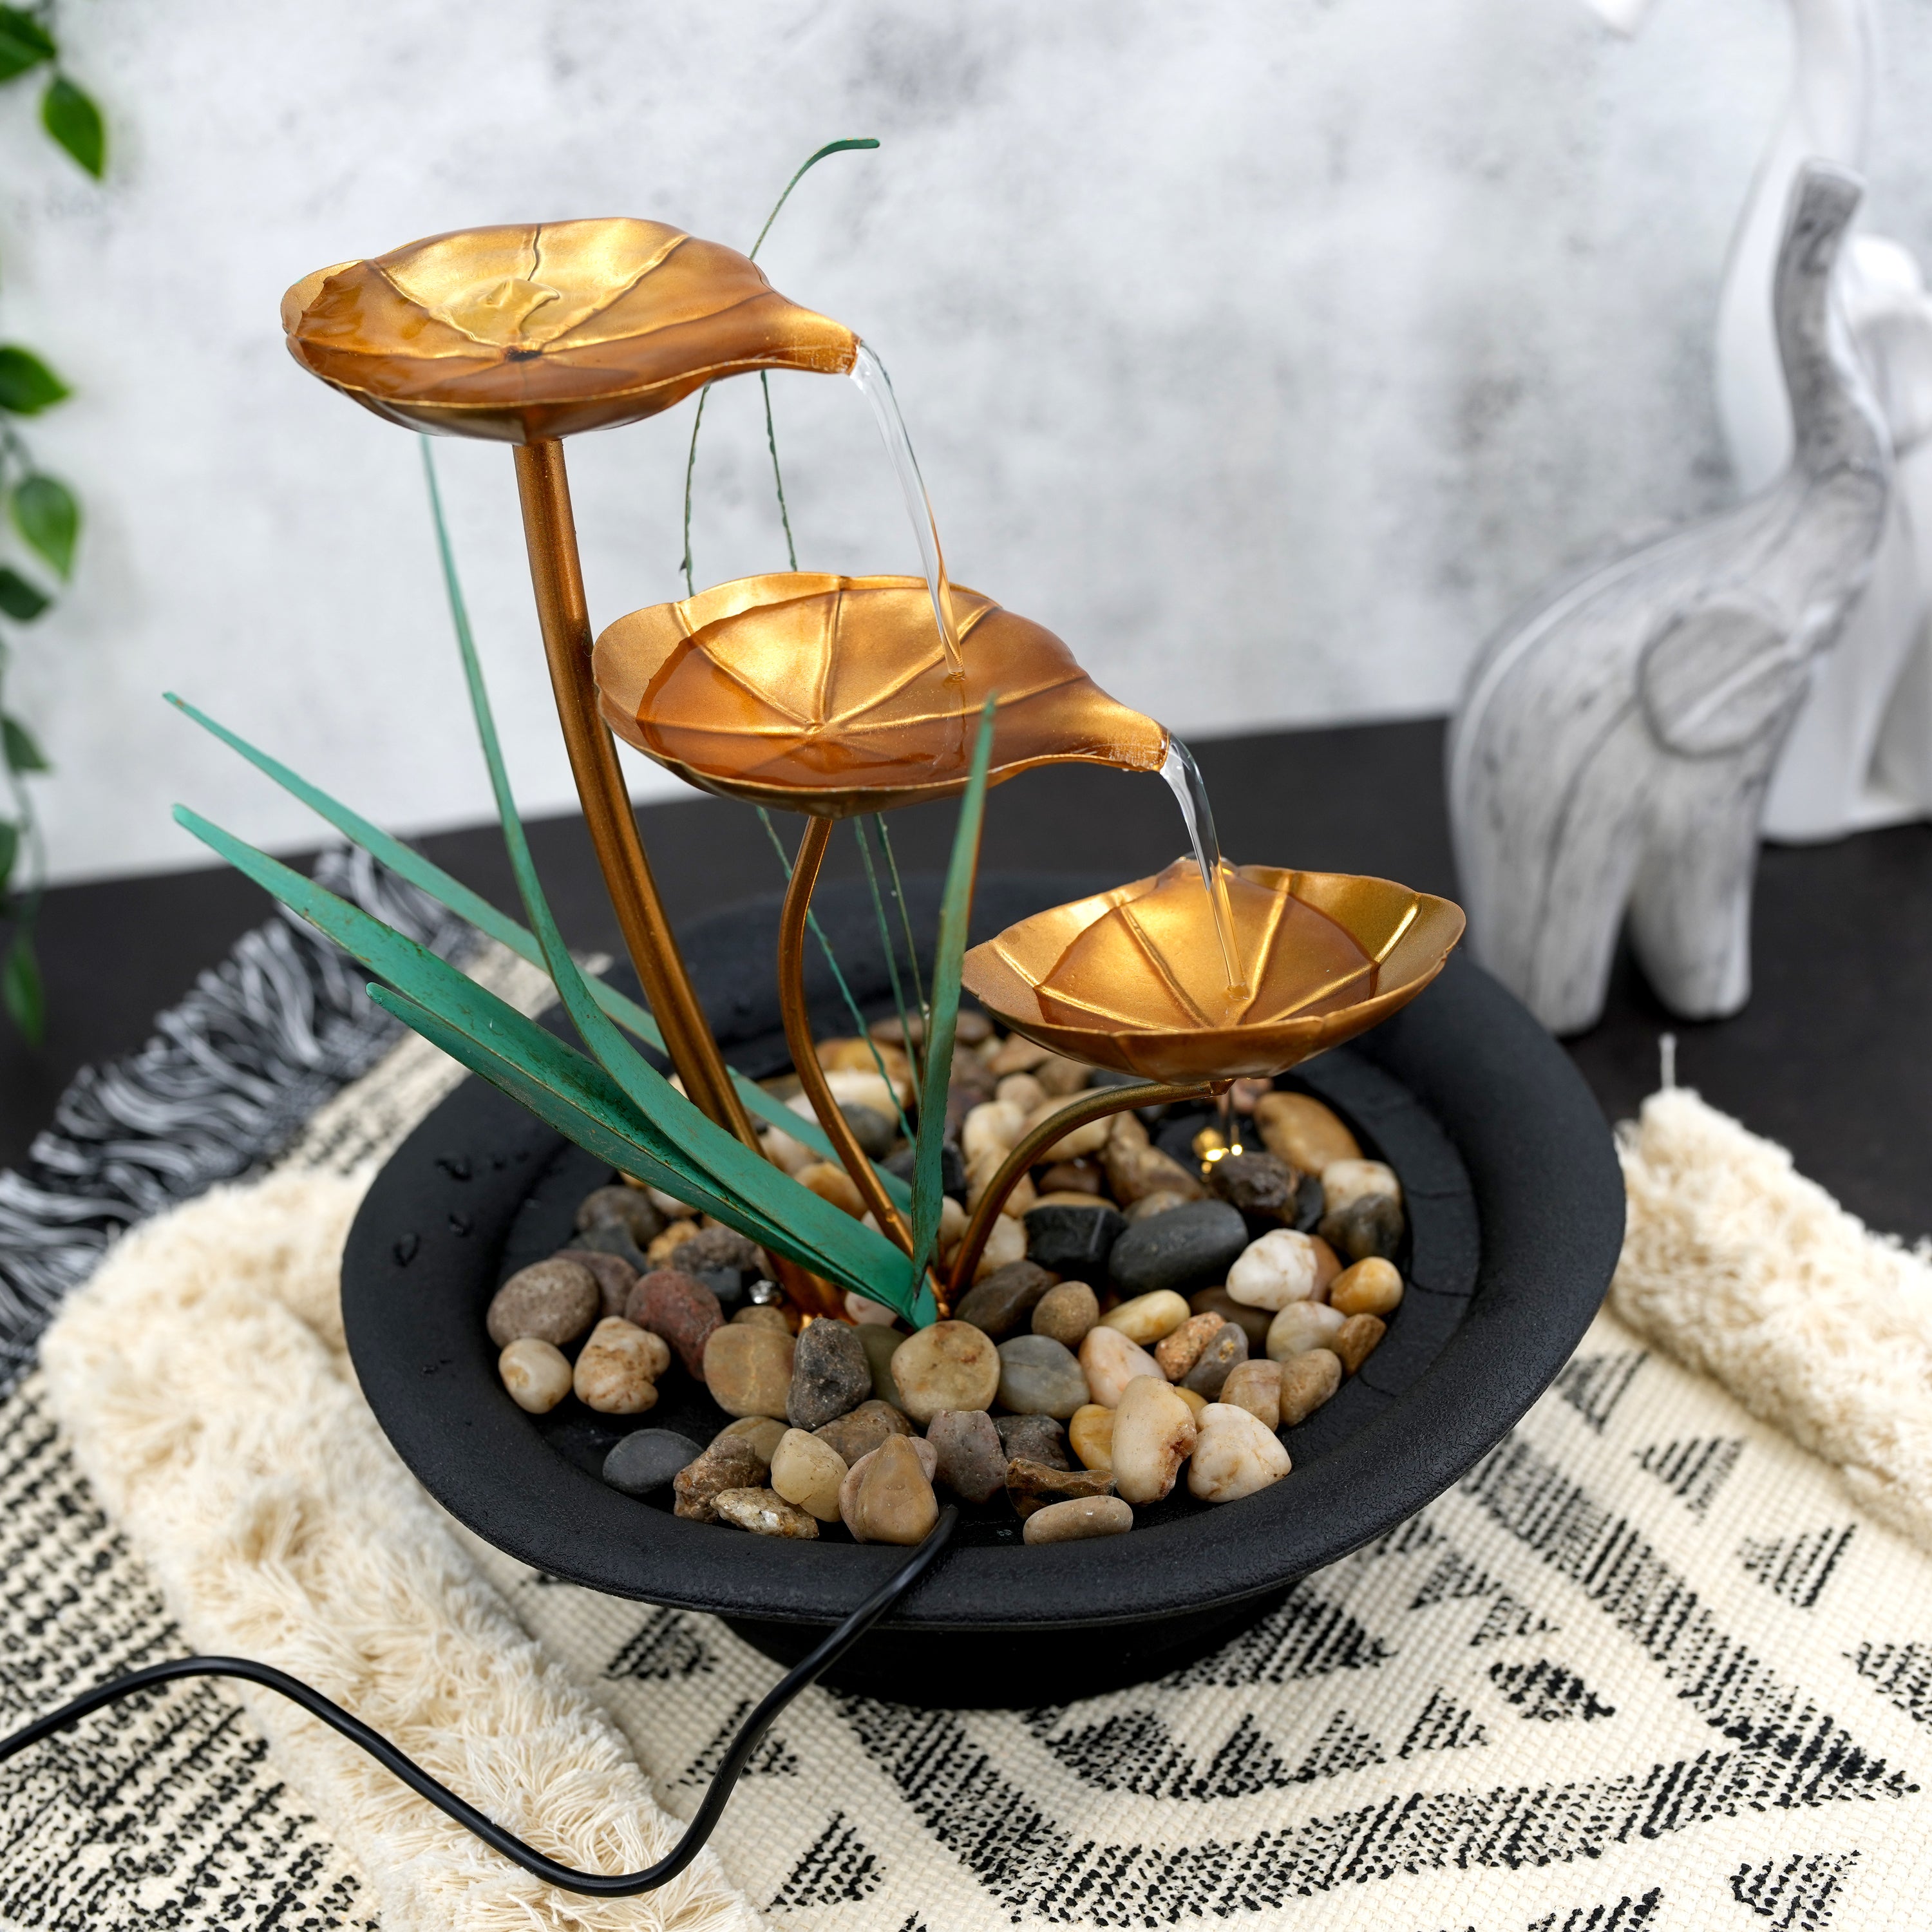 Lotus Water Feature Led Lights GEEZY - The Magic Toy Shop